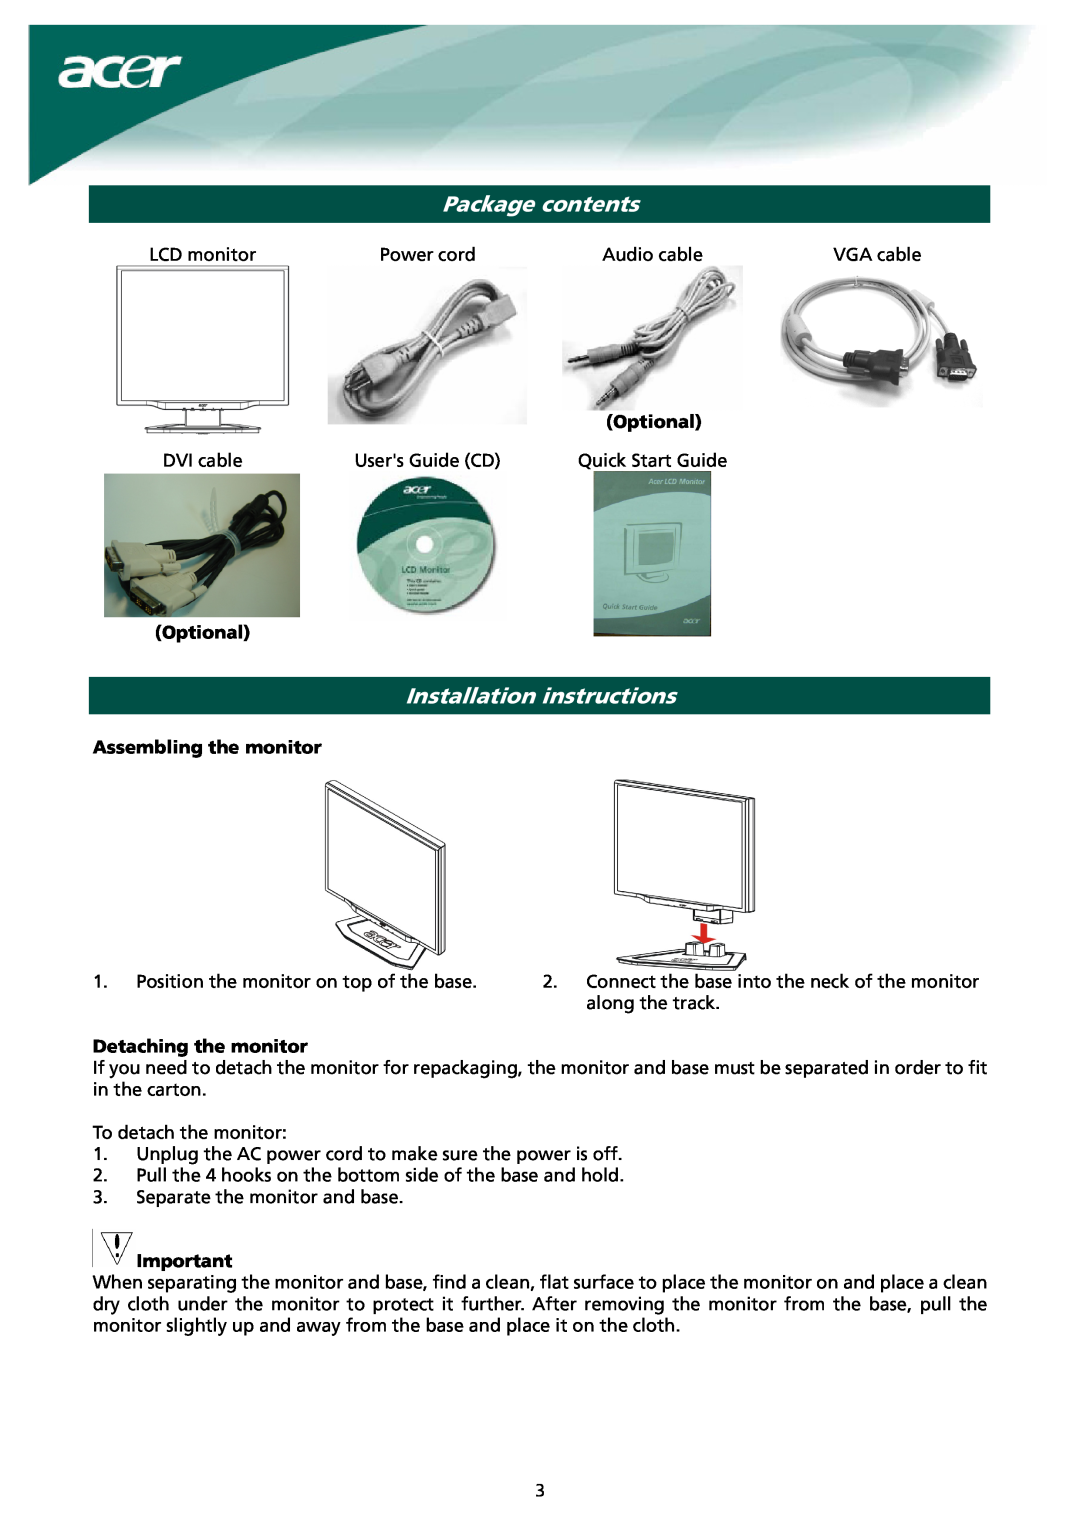 Acer X171 Package contents, Installation instructions, Optional, Assembling the monitor, Detaching the monitor 